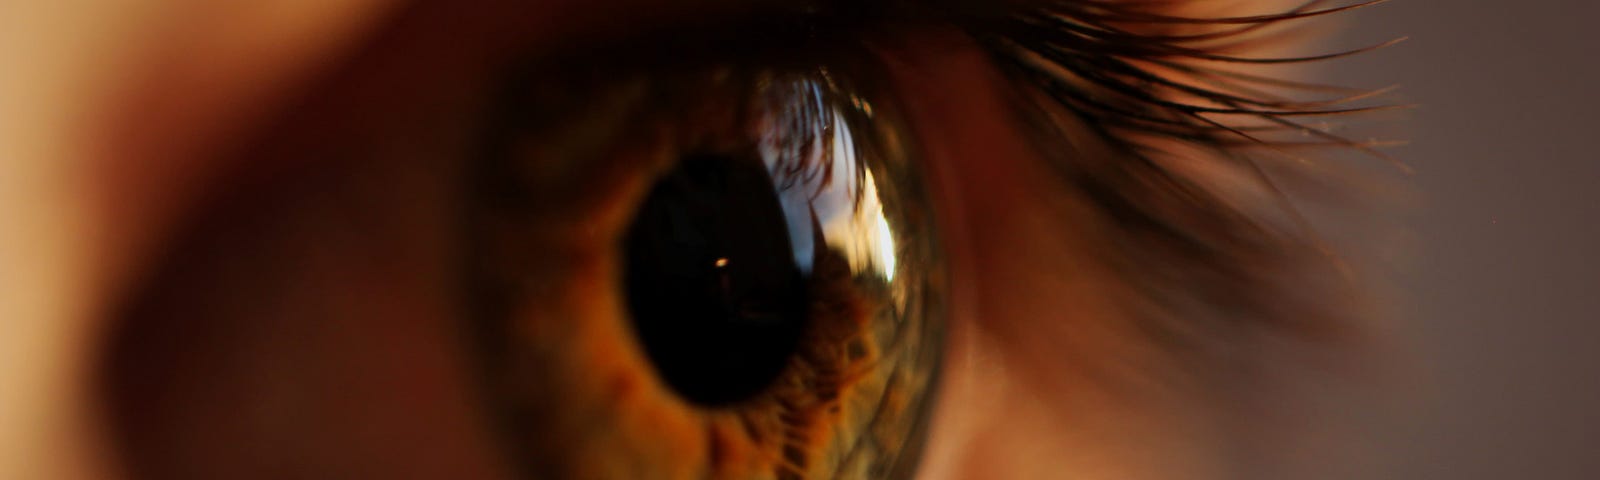 Close up picture of an eye